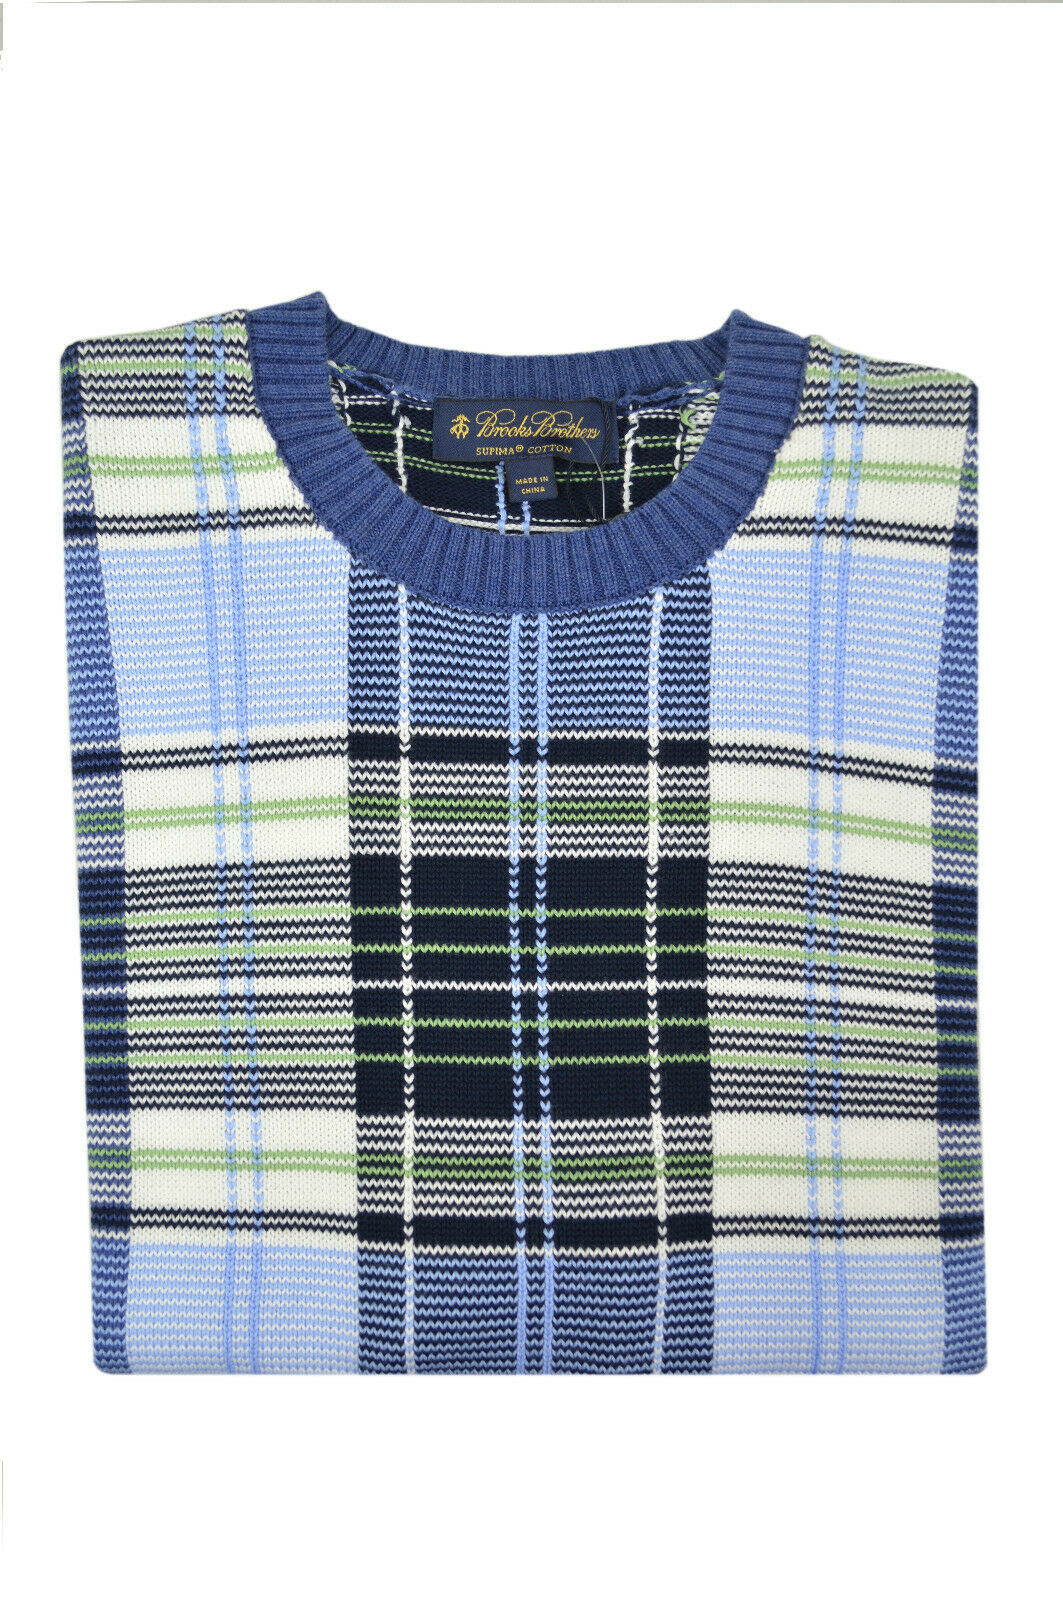 Primary image for Brooks Brothers Mens Blue Plaid Supima Cotton Crewneck Sweater  L Large  3434-7